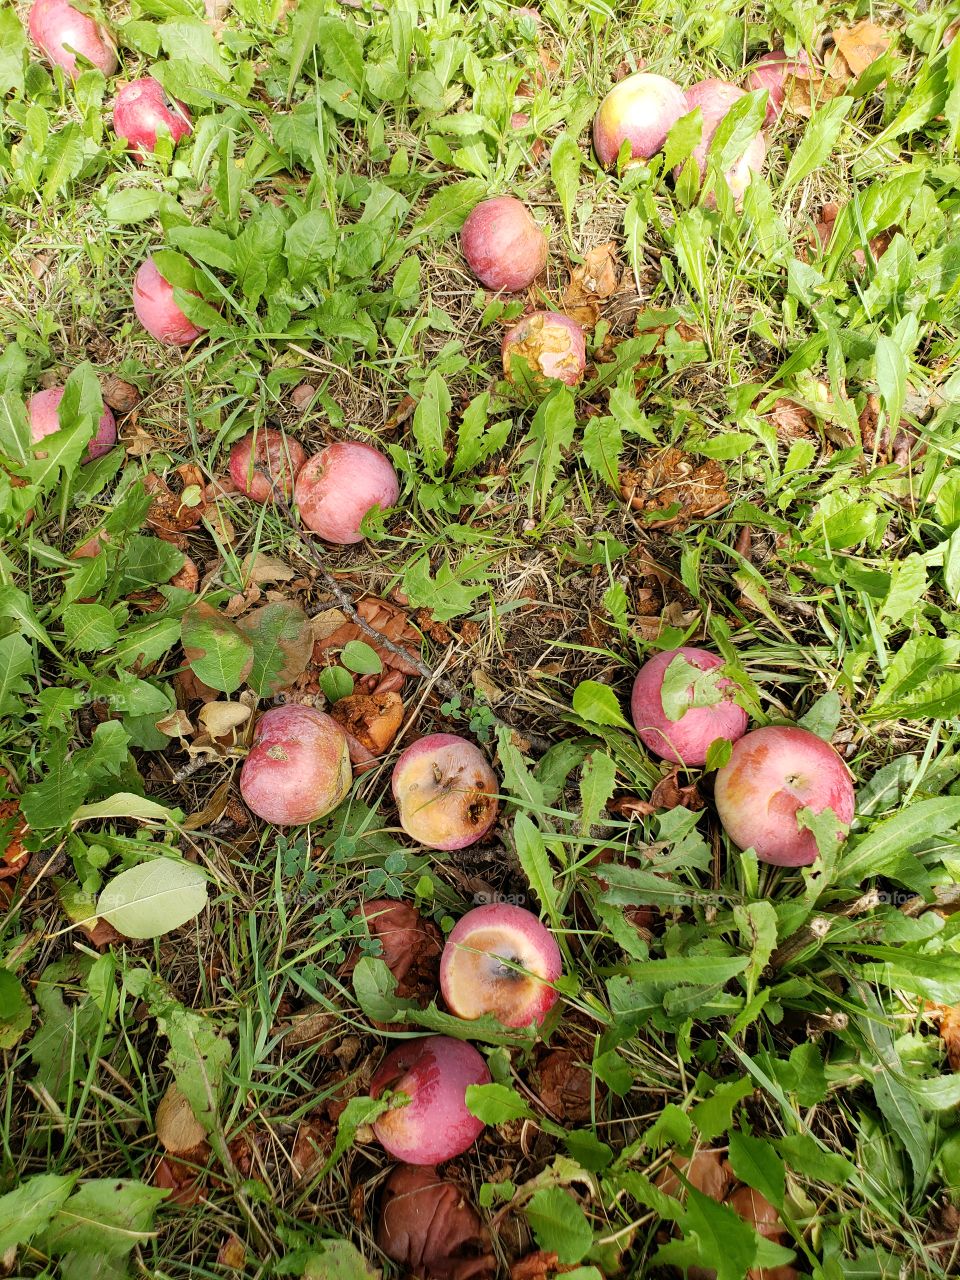 ripe apples on the ground in the grass